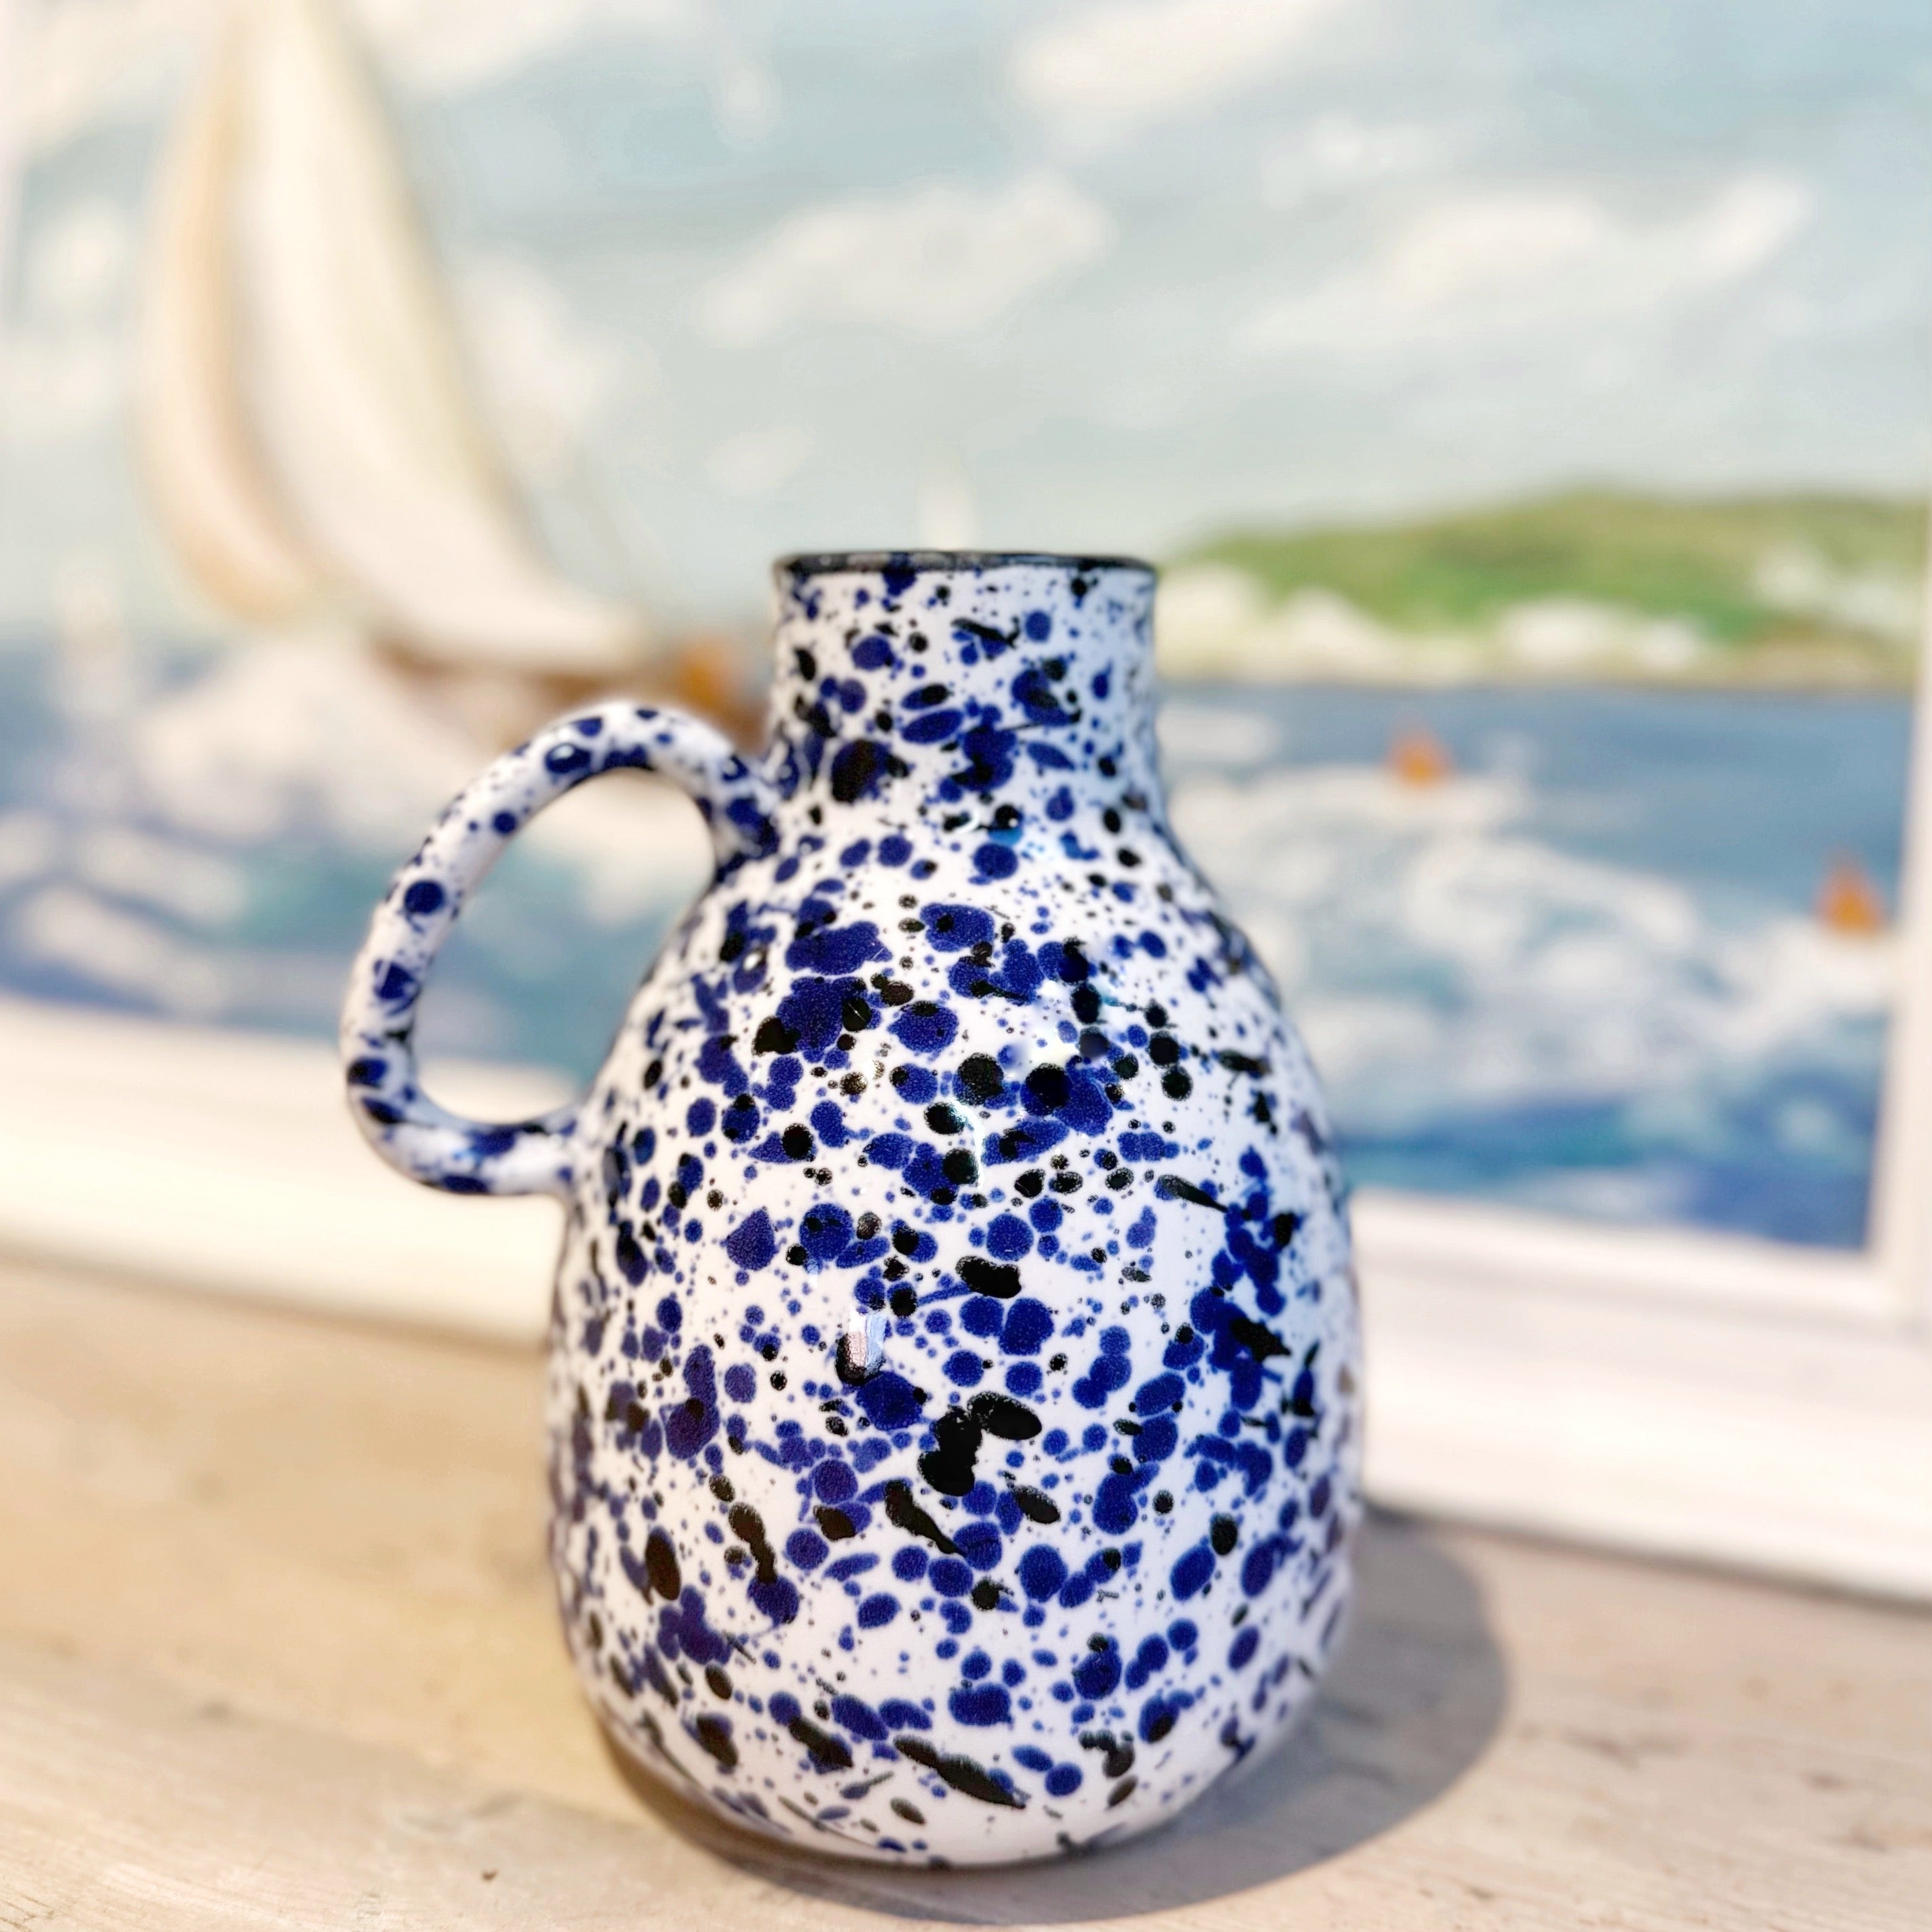 Small Blue and White Speckled Vase